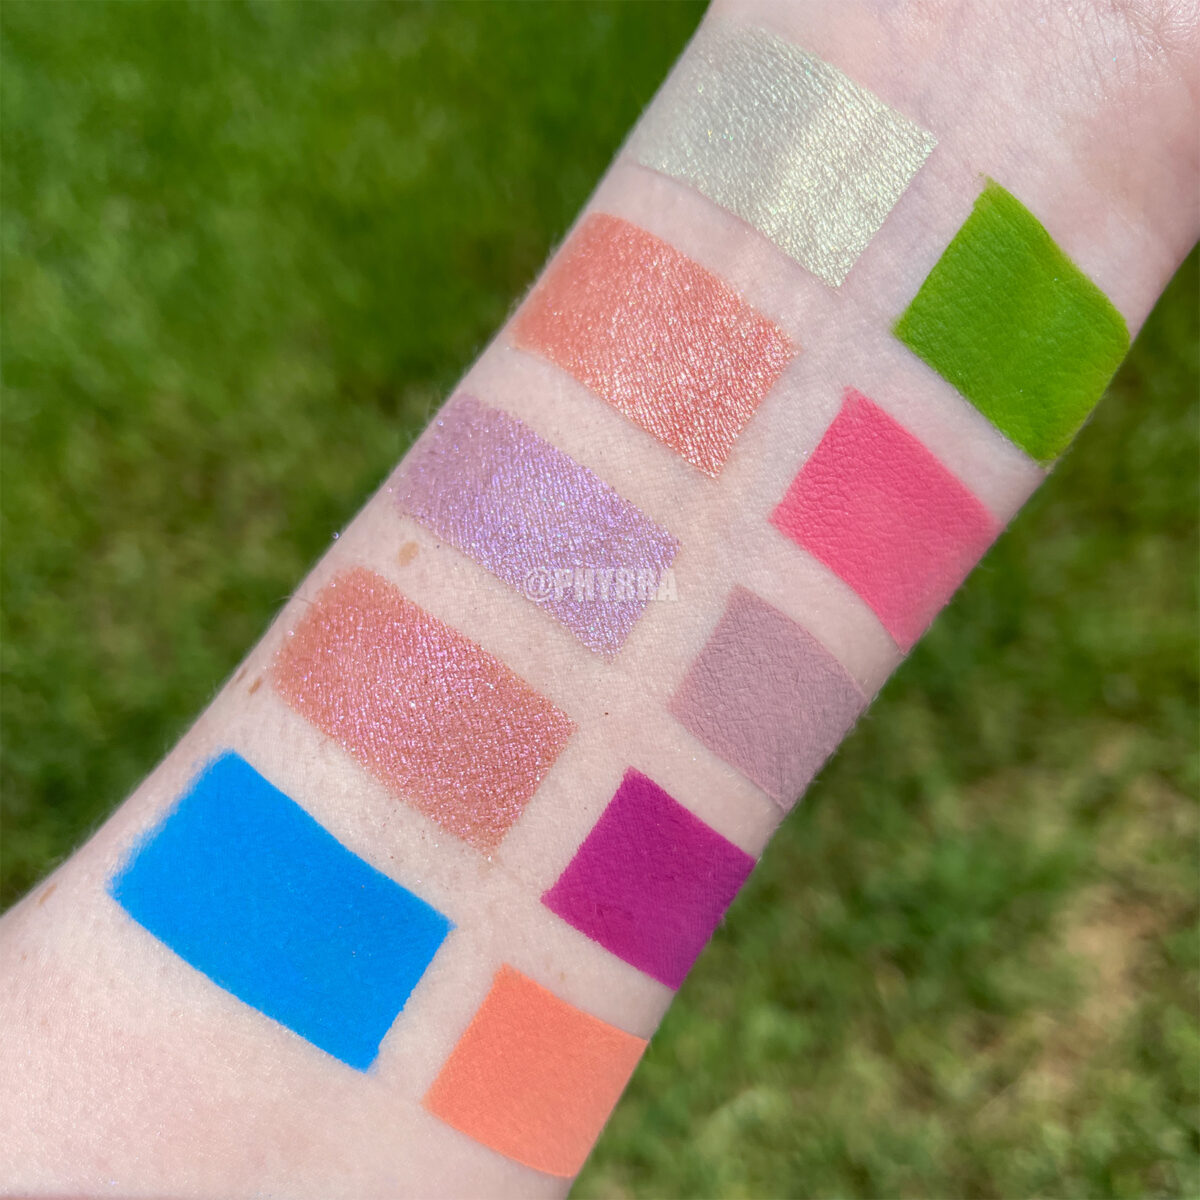 Sugarpill Anniversary Capsule Collection Palette Swatches on Pale Skin